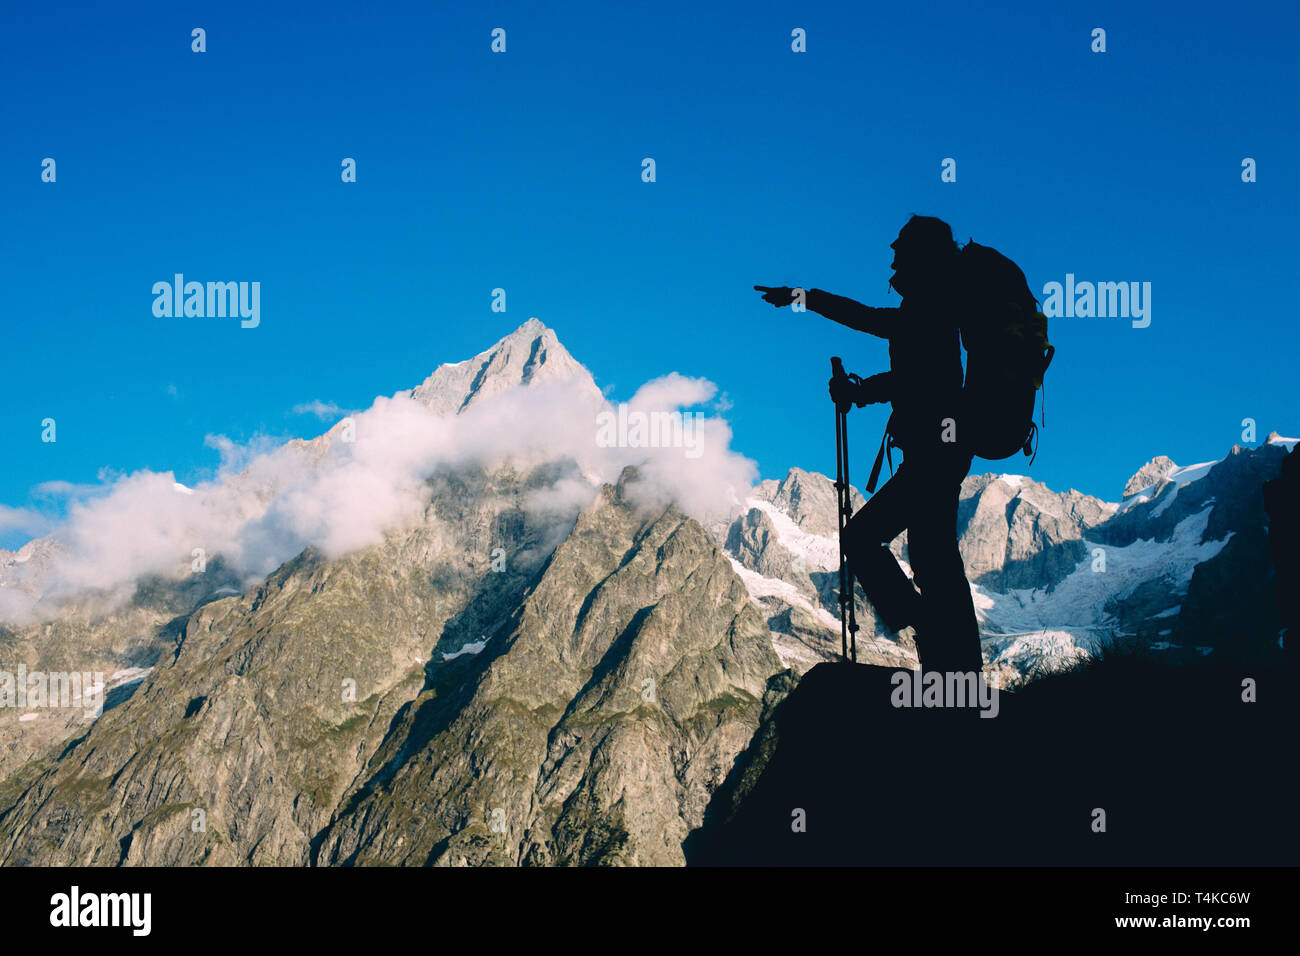 Silhouette woman with backpack and trekking pole, hiking over European Alps on the background. Stock Photo